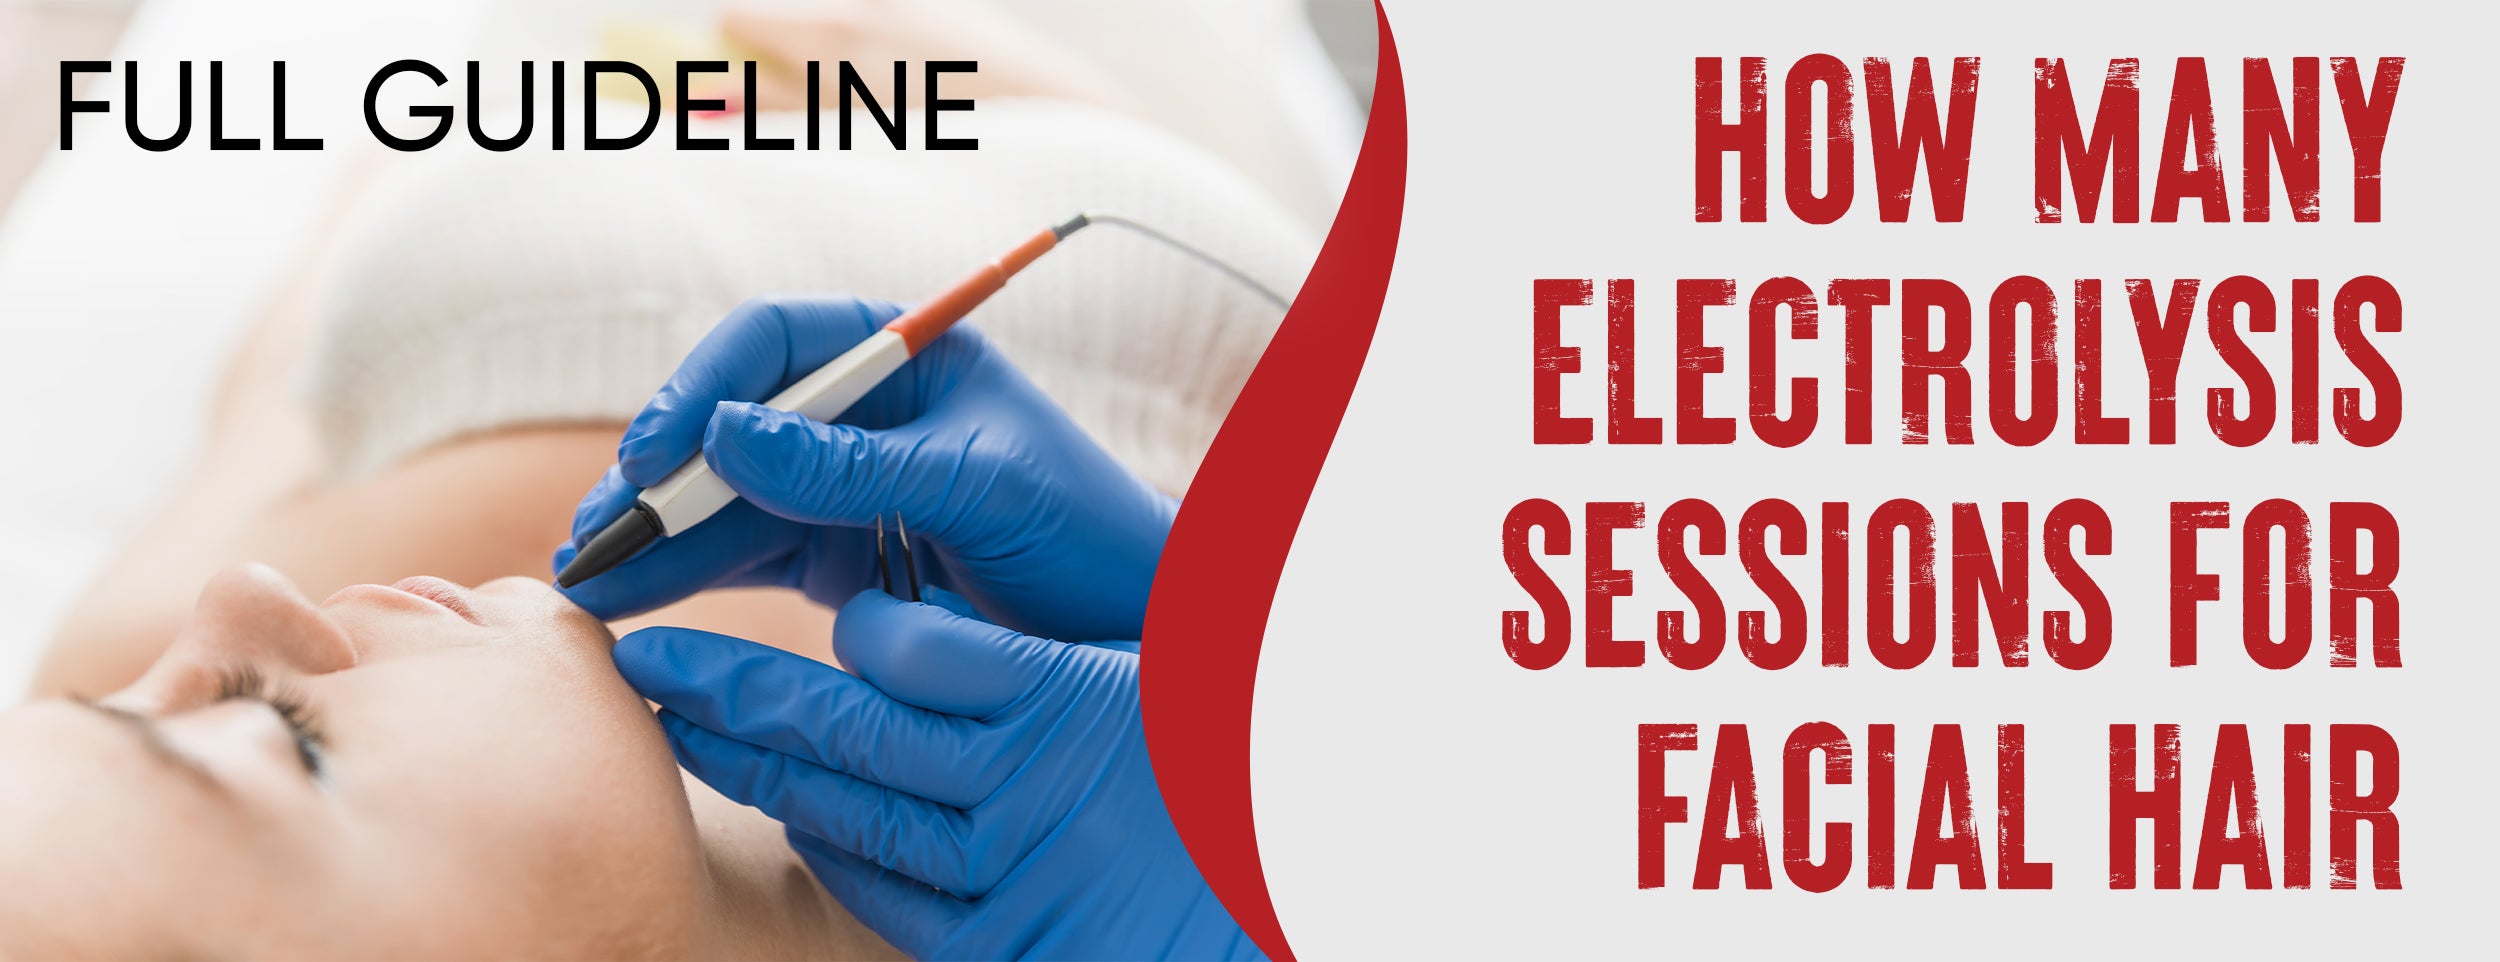 The number of electrolysis sessions you need depends on your hair type